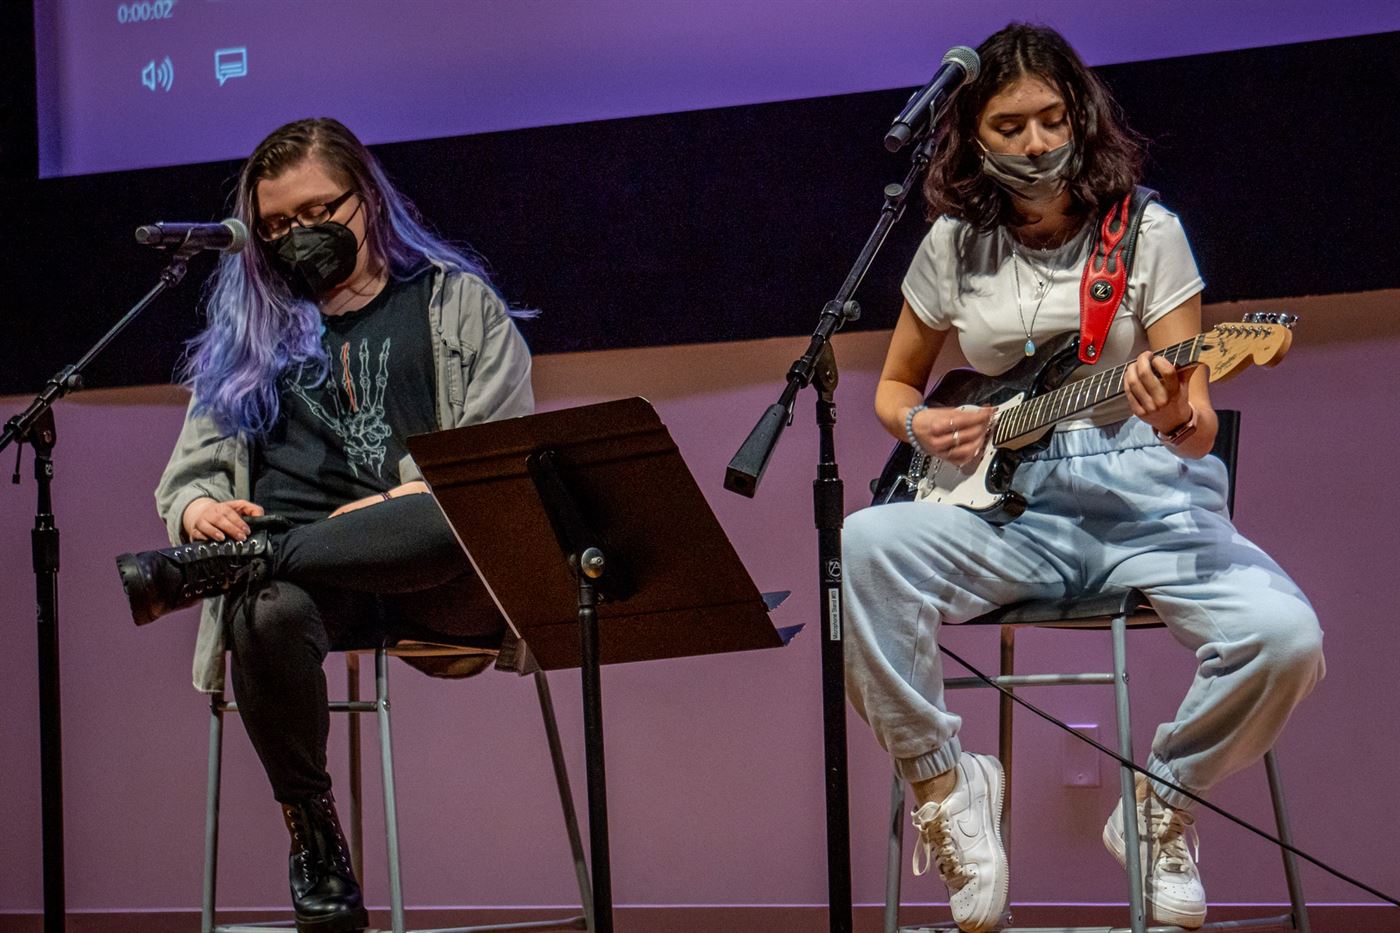 Left to right: Emily McCormack, a sophomore film and television major, sings a "Happy Hour Mashup" as Lara Ziccardi, also a sophomore film and television major, sings and plays her guitar with her. Lynise Olivacce | The Montclarion